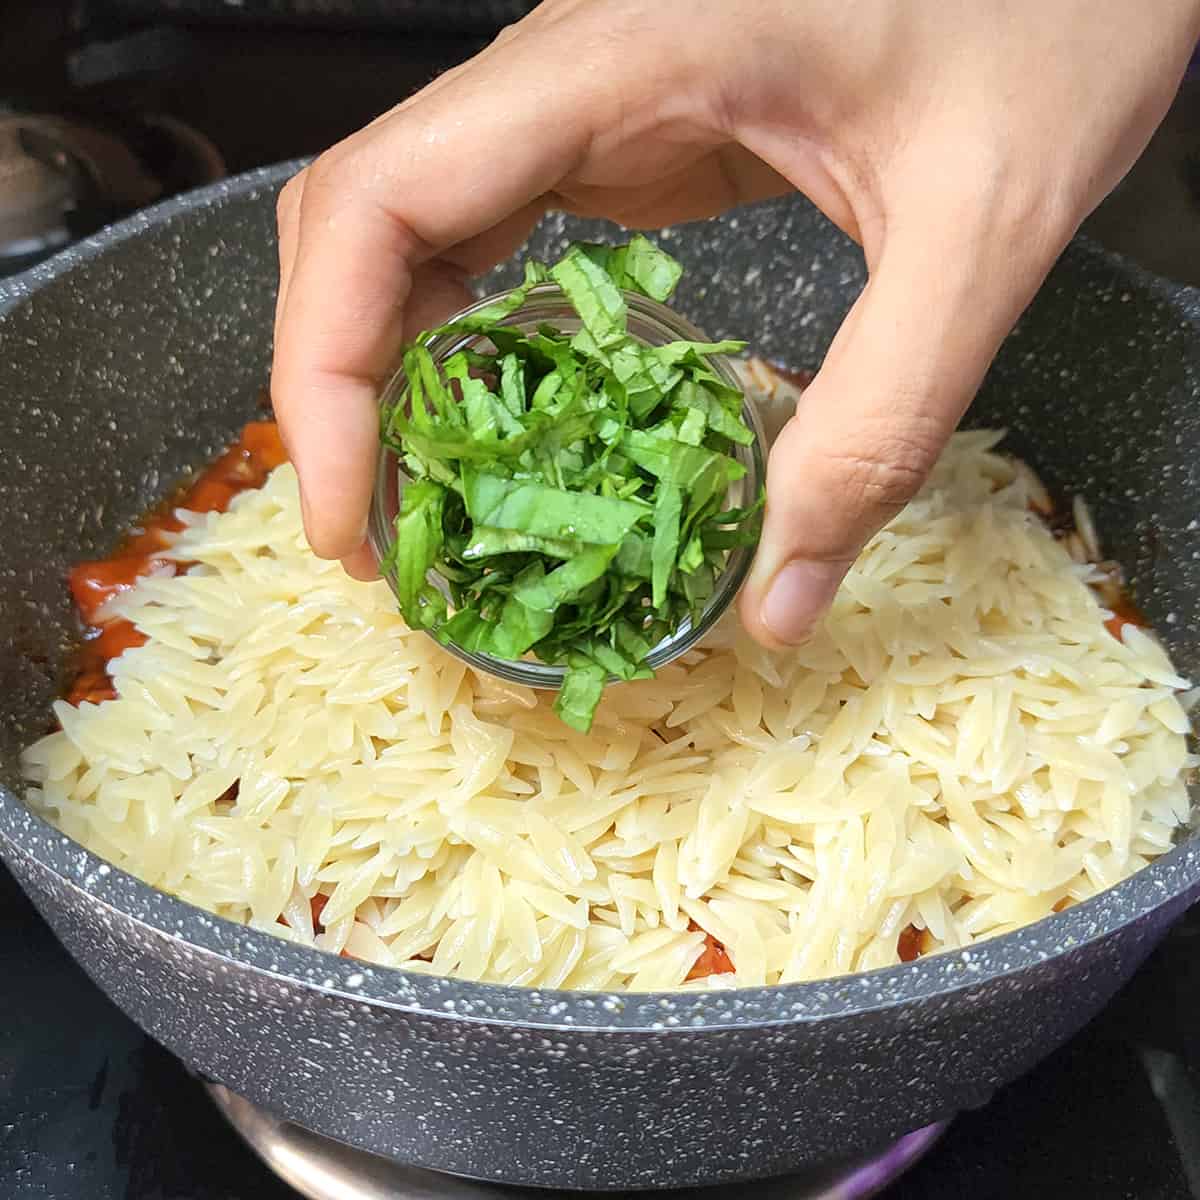 Add fresh basil leaves to the pan in which pasta is being cooked.